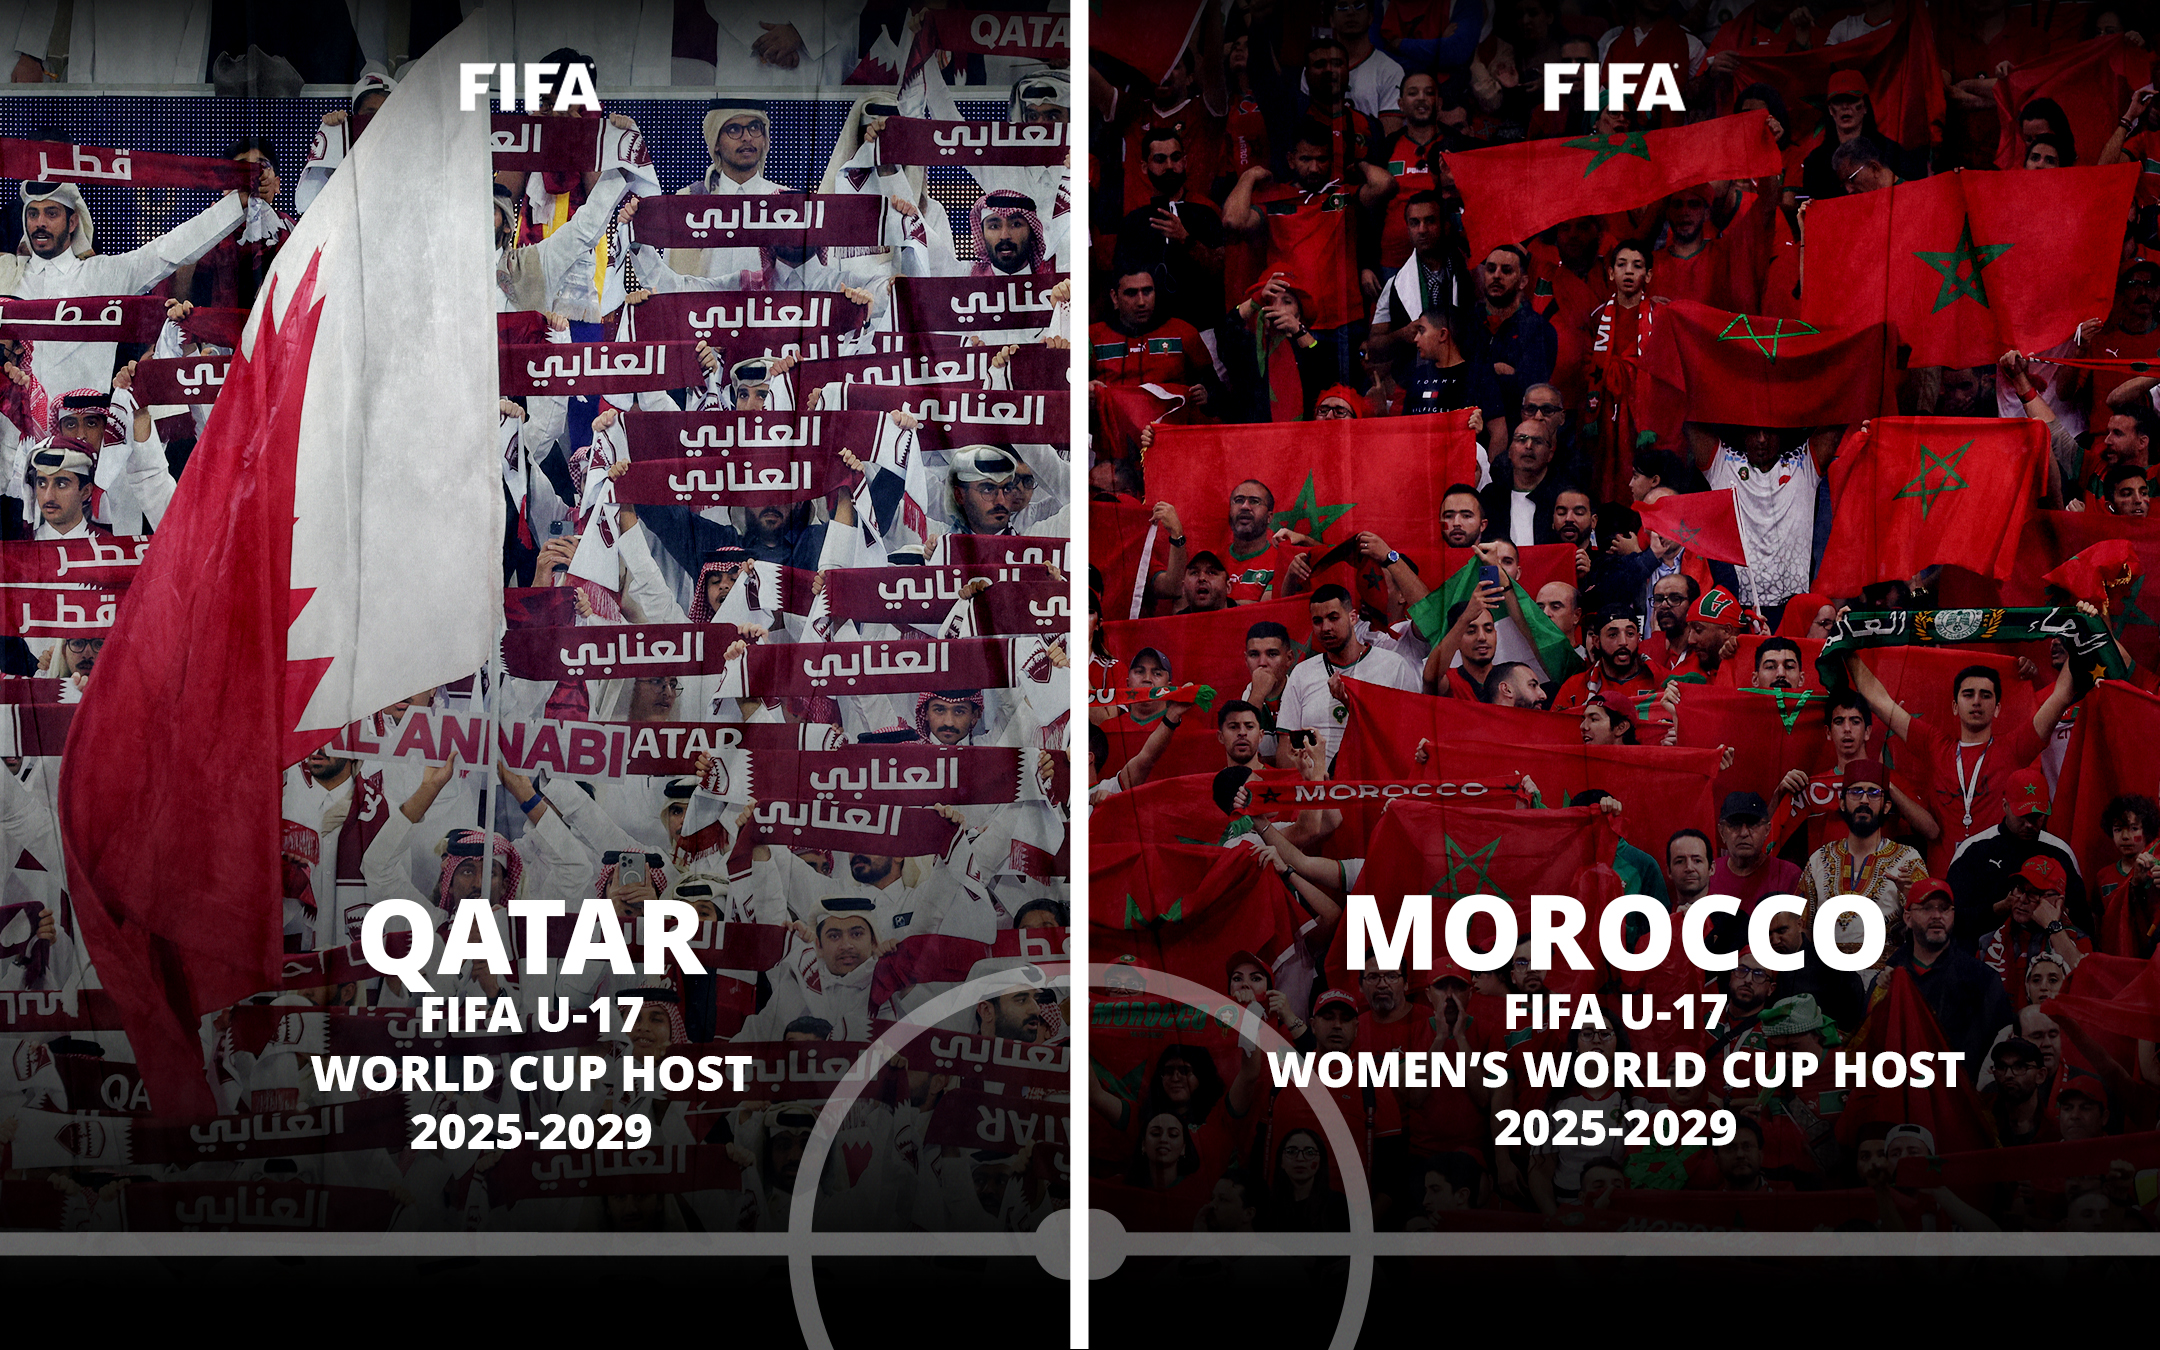 FIFA U-17 WWC Championship to hold annually, Qatar, Morocco to host next 5 editions